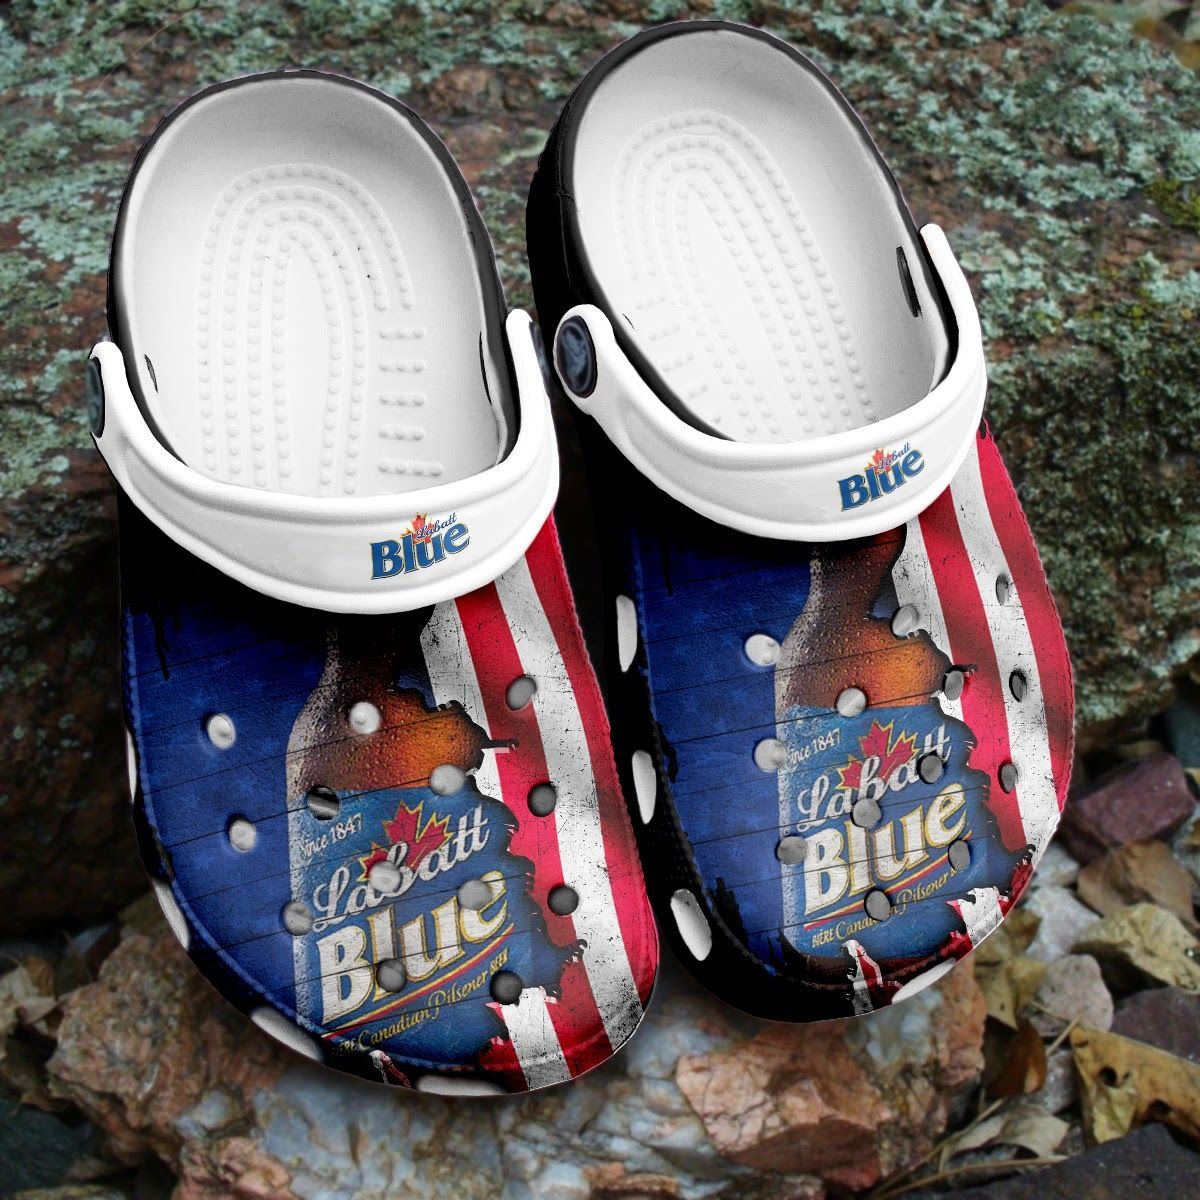 If you'd like to purchase a pair of Crocband Clogs, be sure to check out the official website. 112